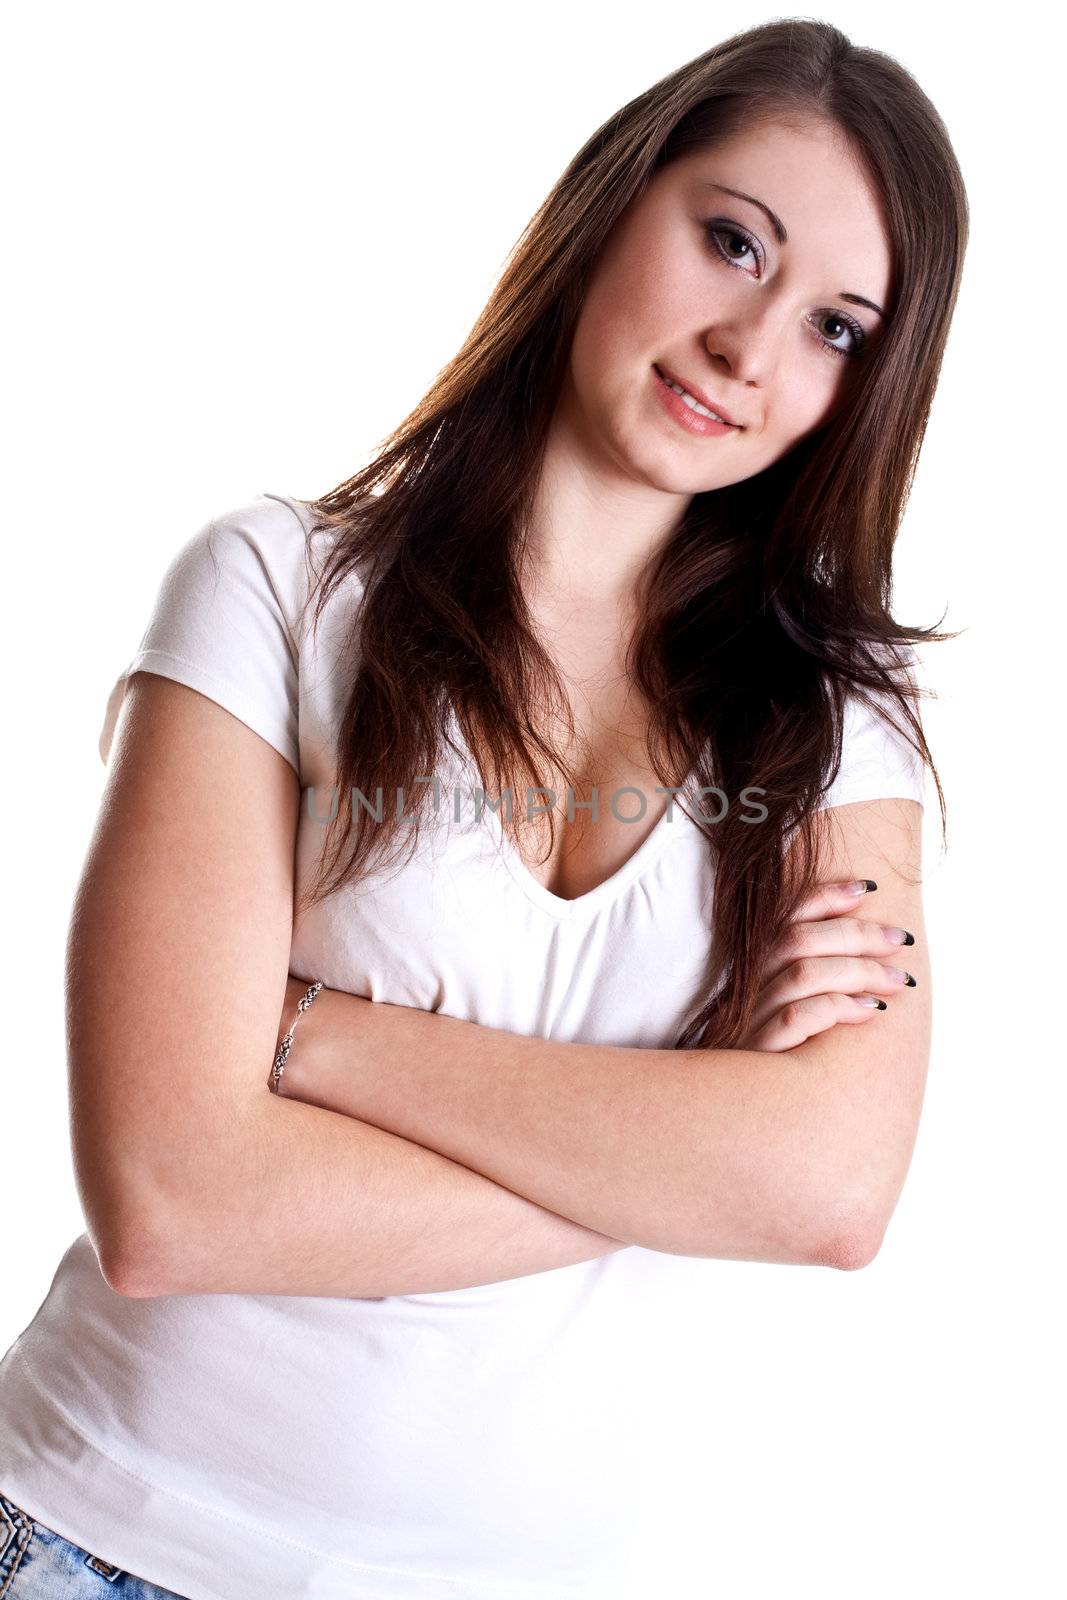 smiling young woman posing on a white background